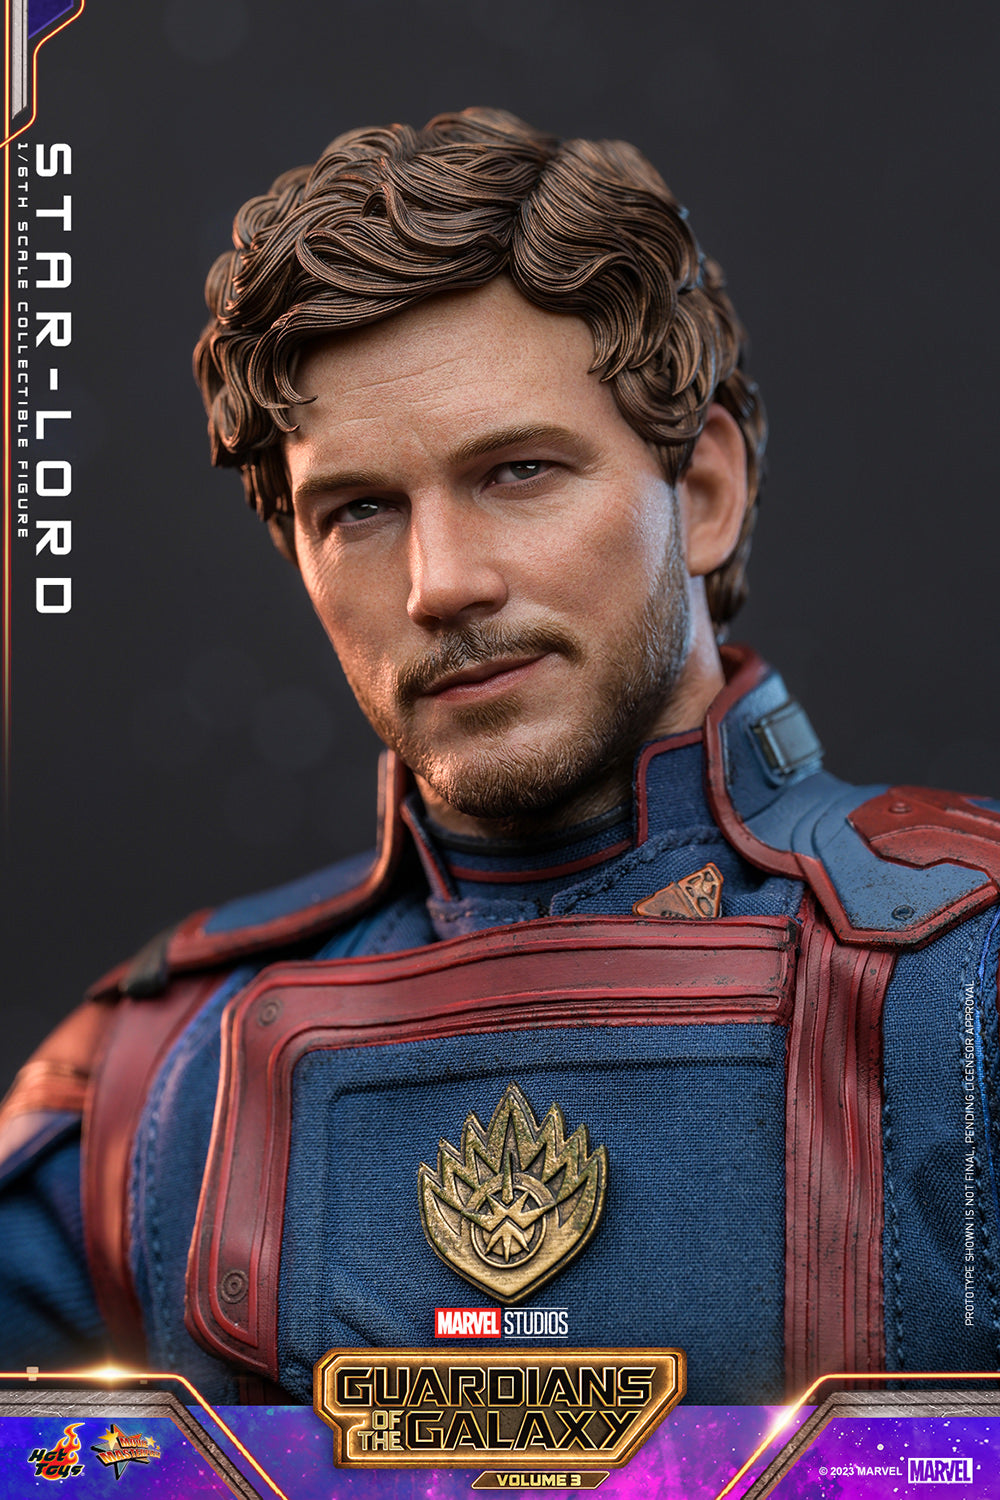 PRE-ORDER Star-Lord Sixth Scale Figure